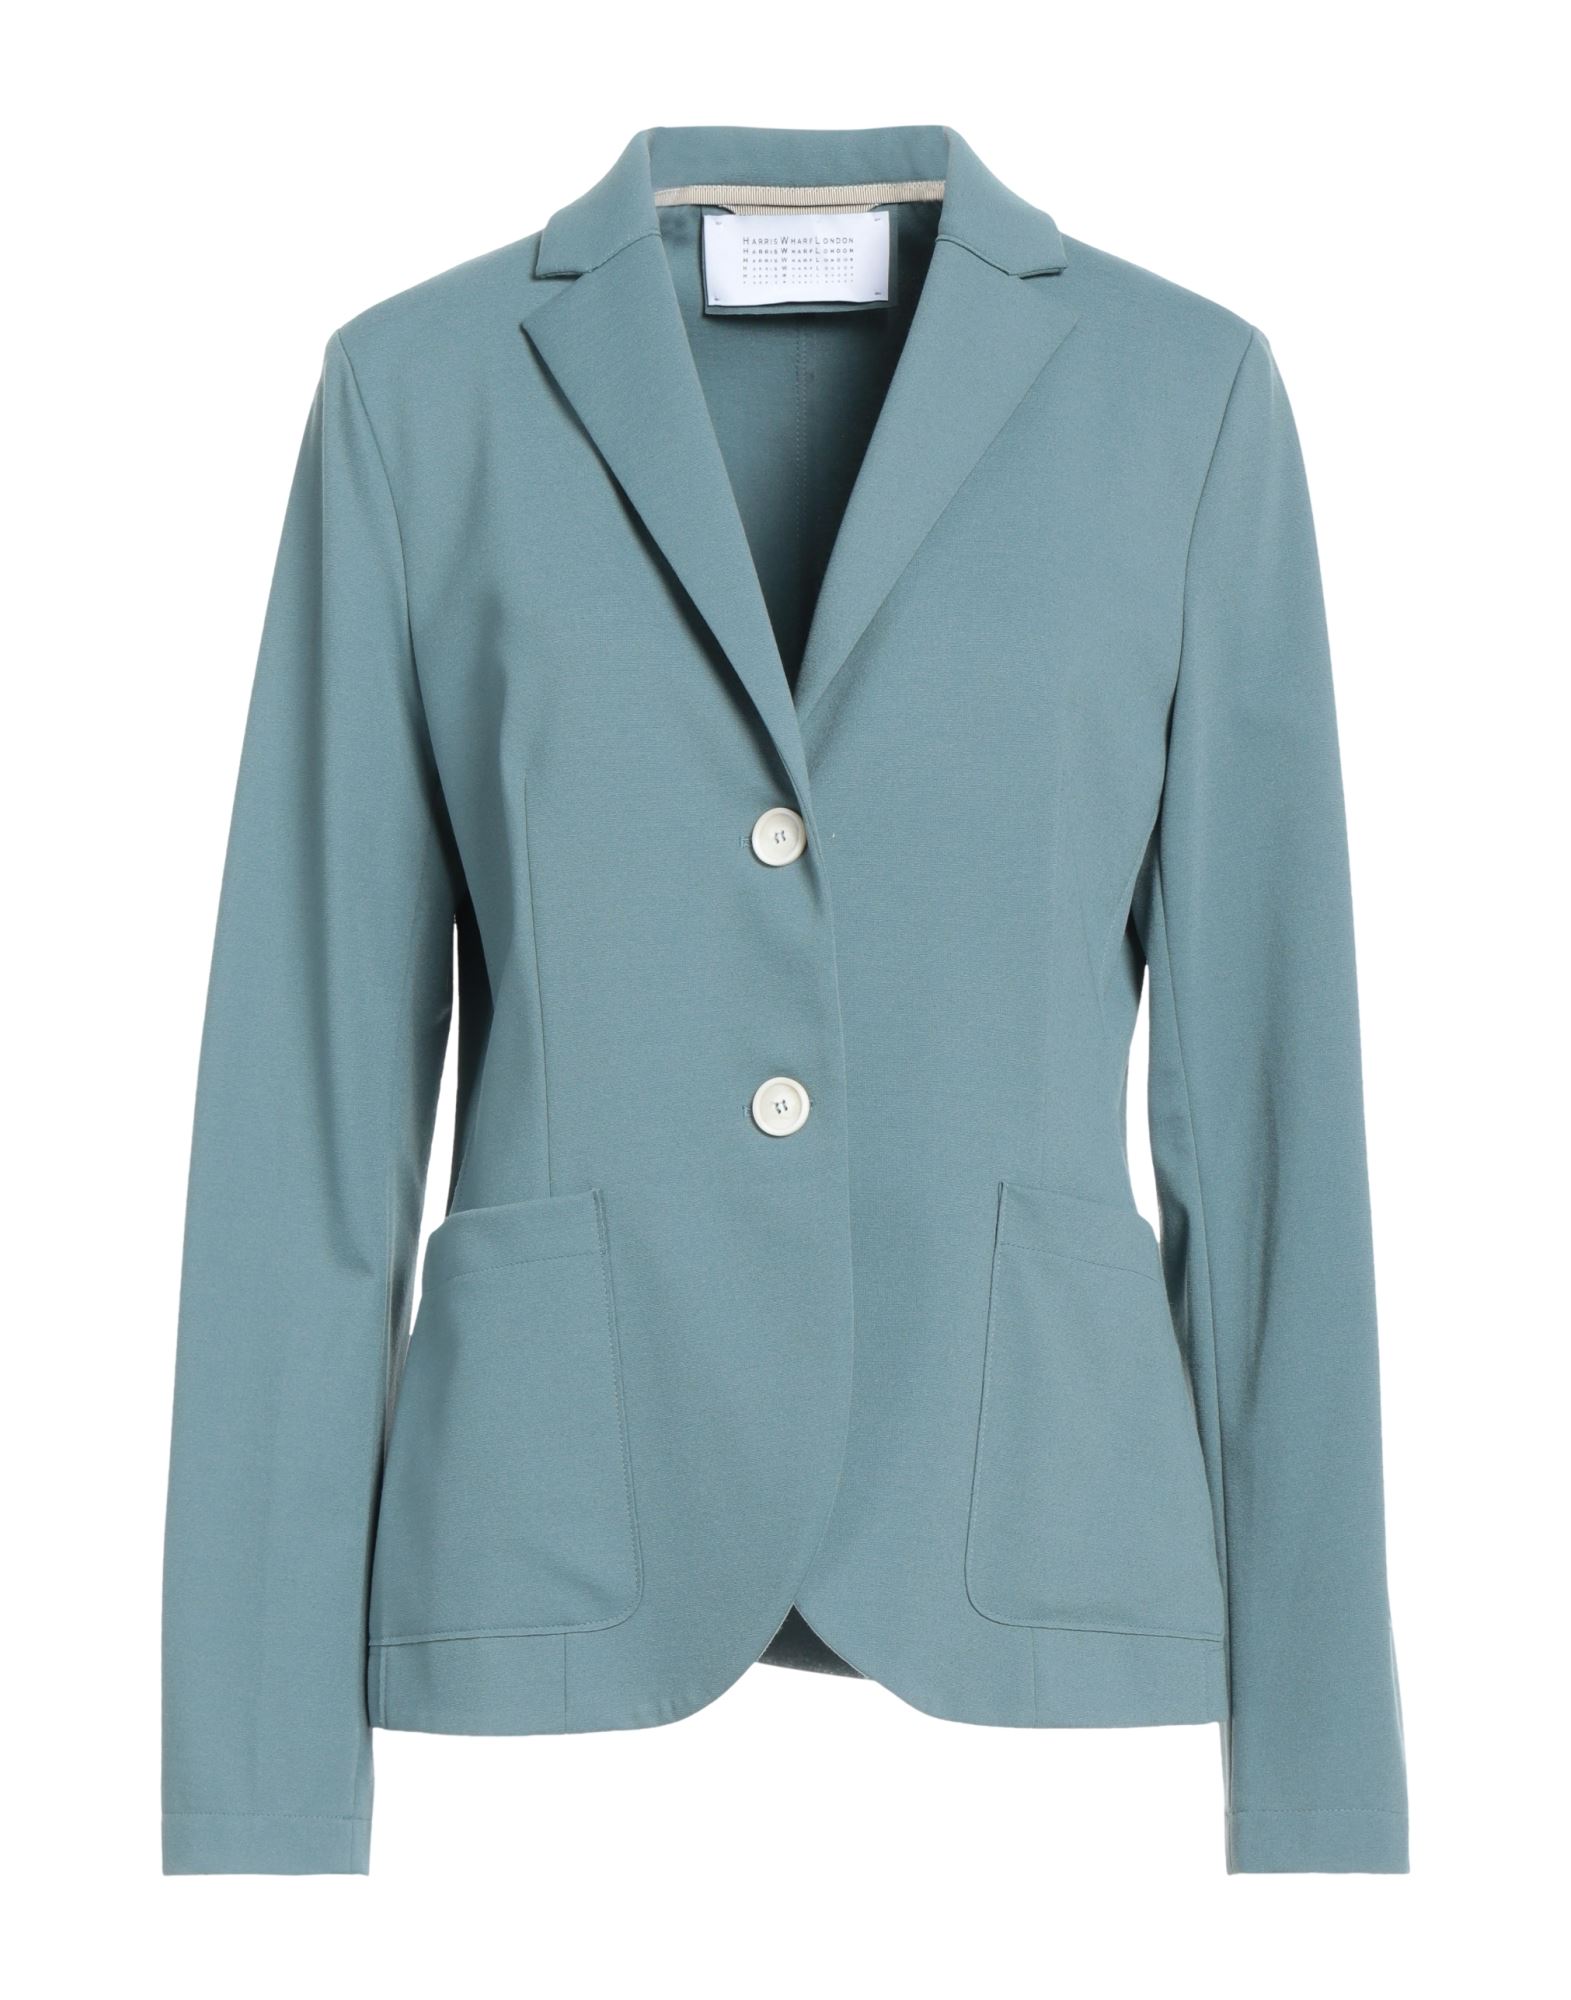 Harris Wharf London Suit Jackets In Sage Green